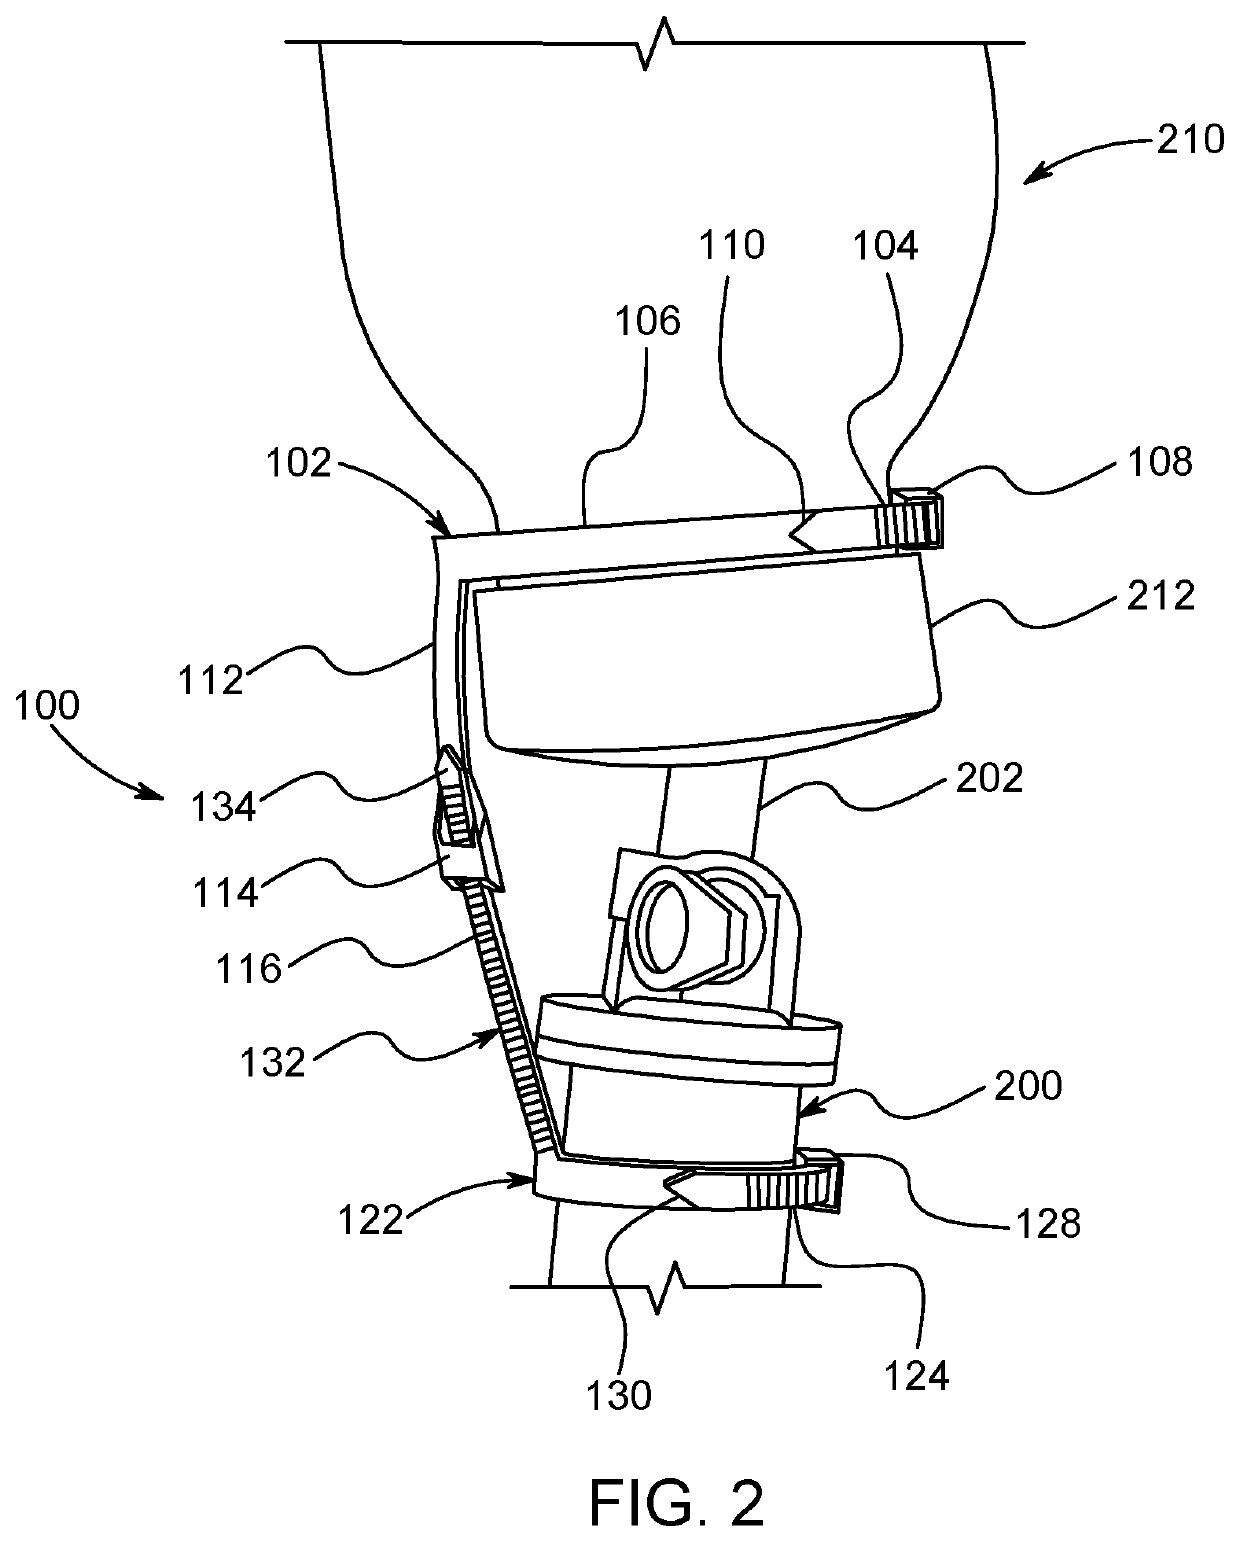 Device for preventing accidental separation of a drip tube from an iv medication bag or bottle